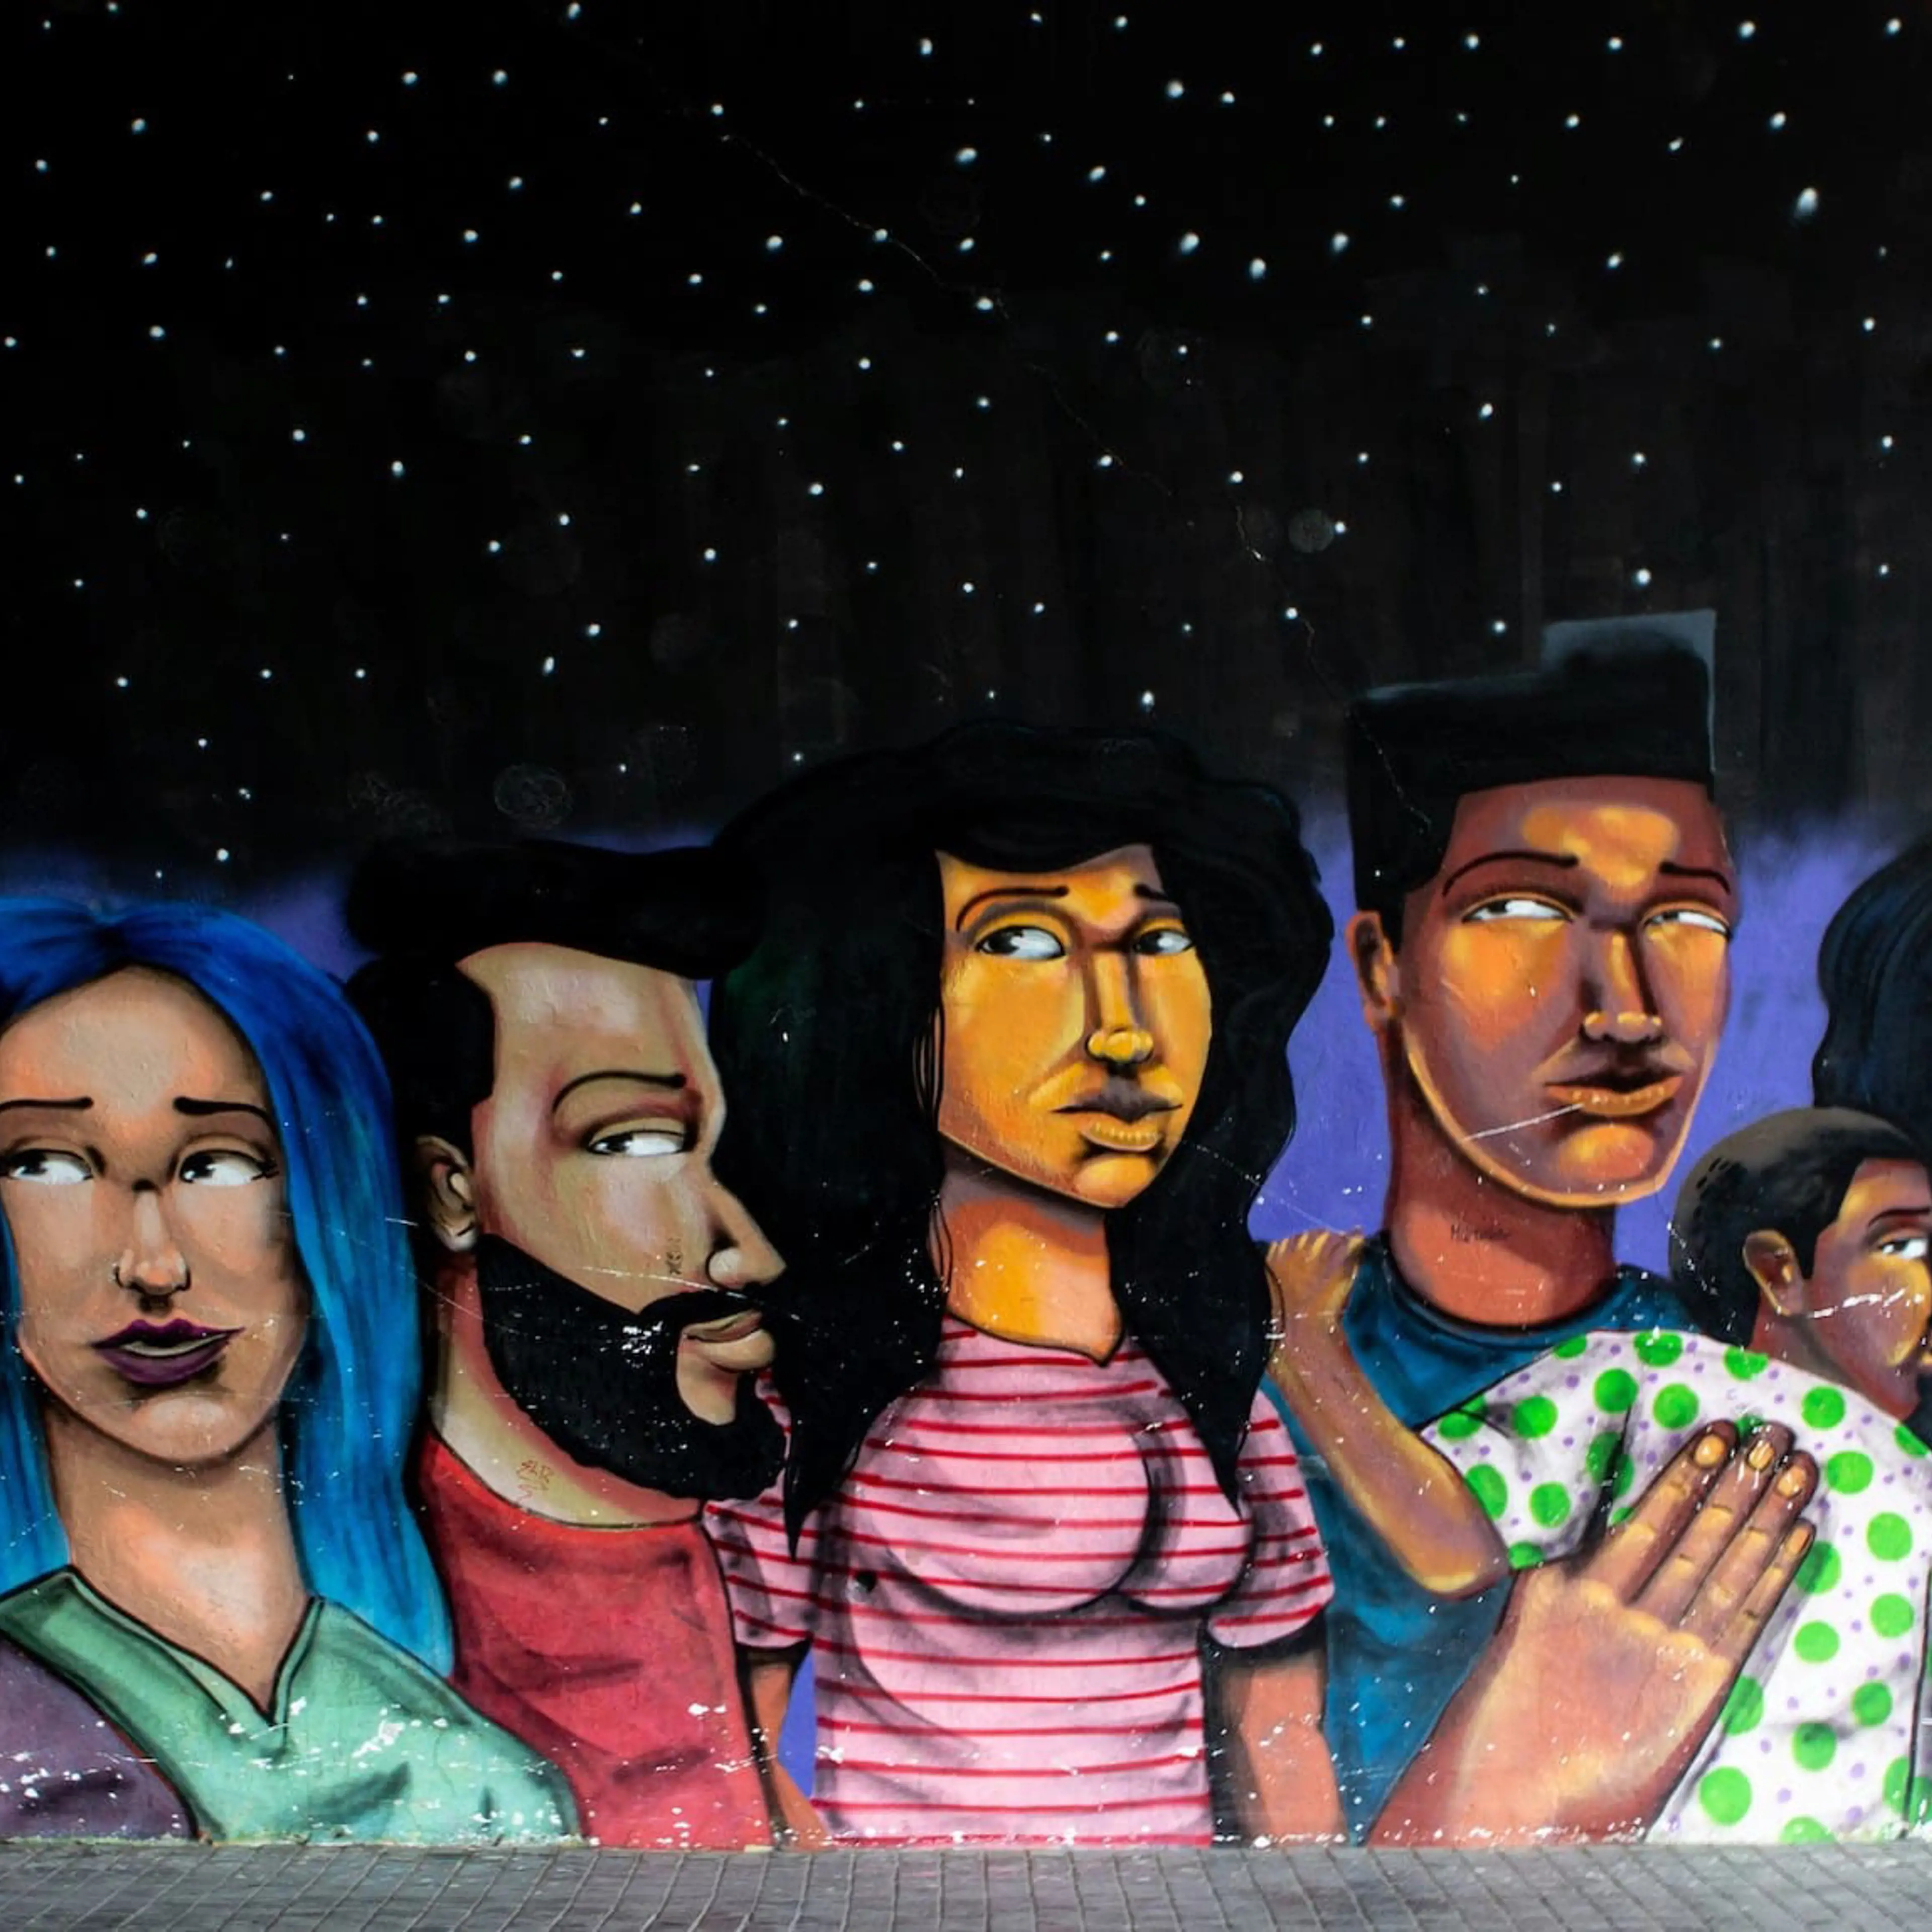 Picture of a mural showing people of various genders and ethnicities